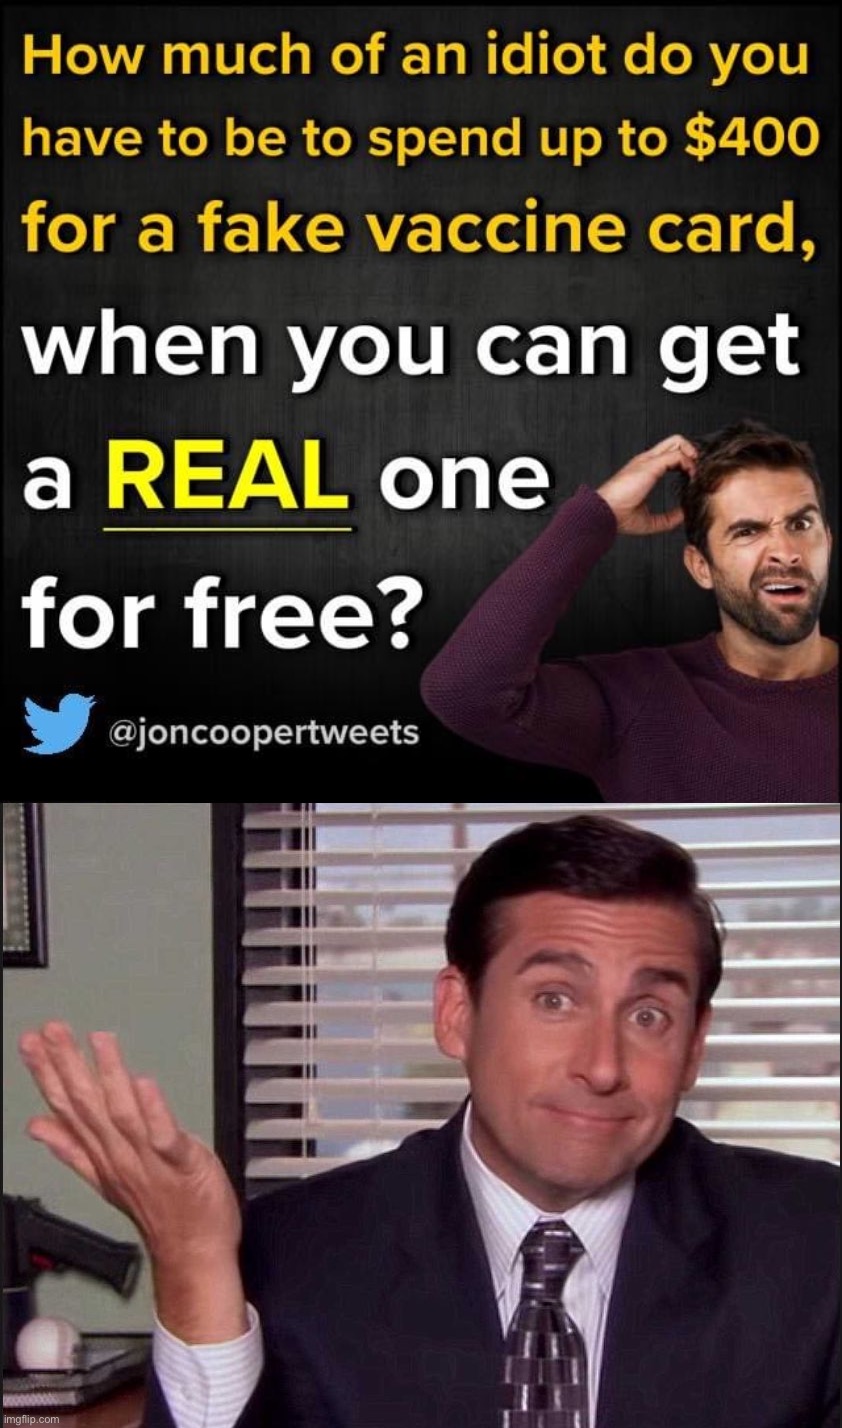 Covidiots are really paying hundreds of dollars on this crap rather than taking the dang vax for free. Welcome to idiocracy. | image tagged in fake vaccine cards,michael scott,antivax,anti-vaxx,covidiots,vaccinations | made w/ Imgflip meme maker